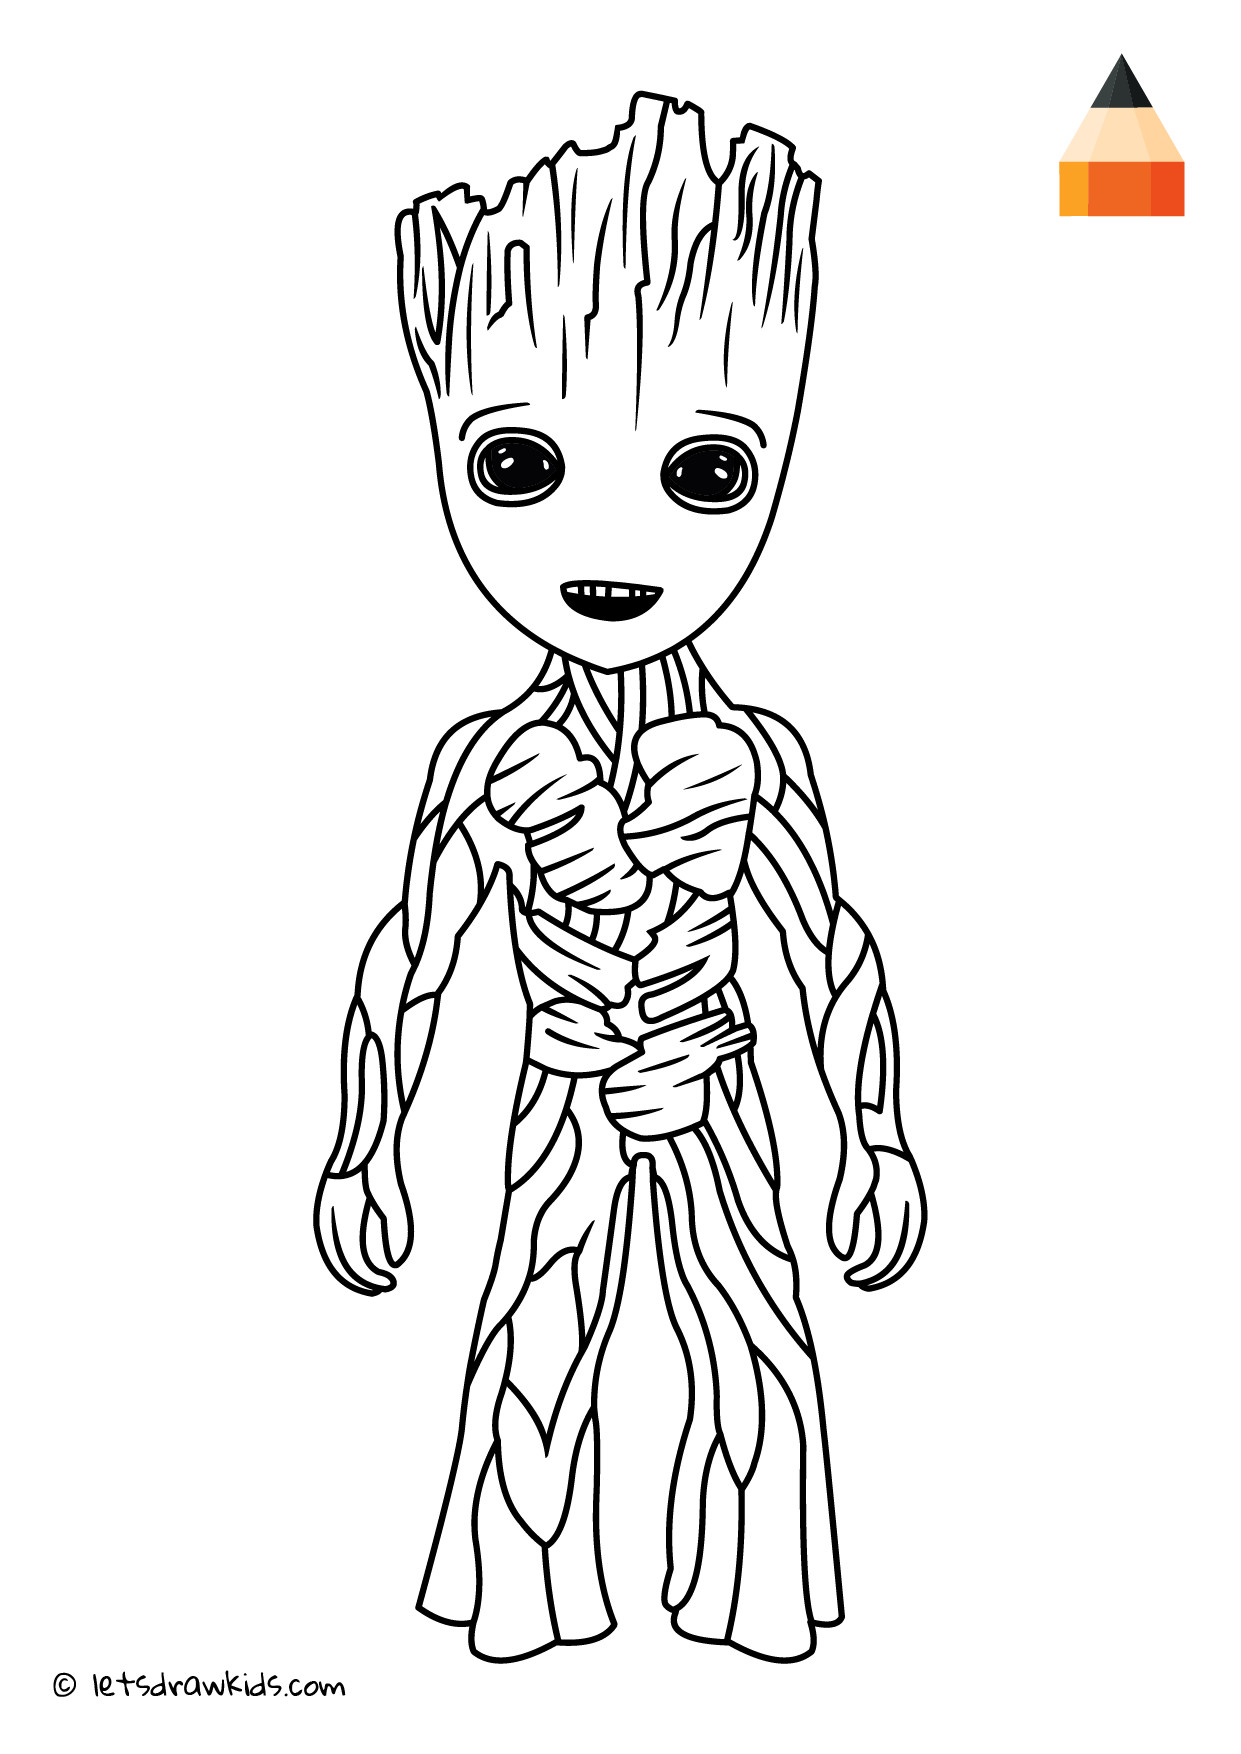 Groot Coloring Pages
 Coloring Page Teenager Groot Coloring pages